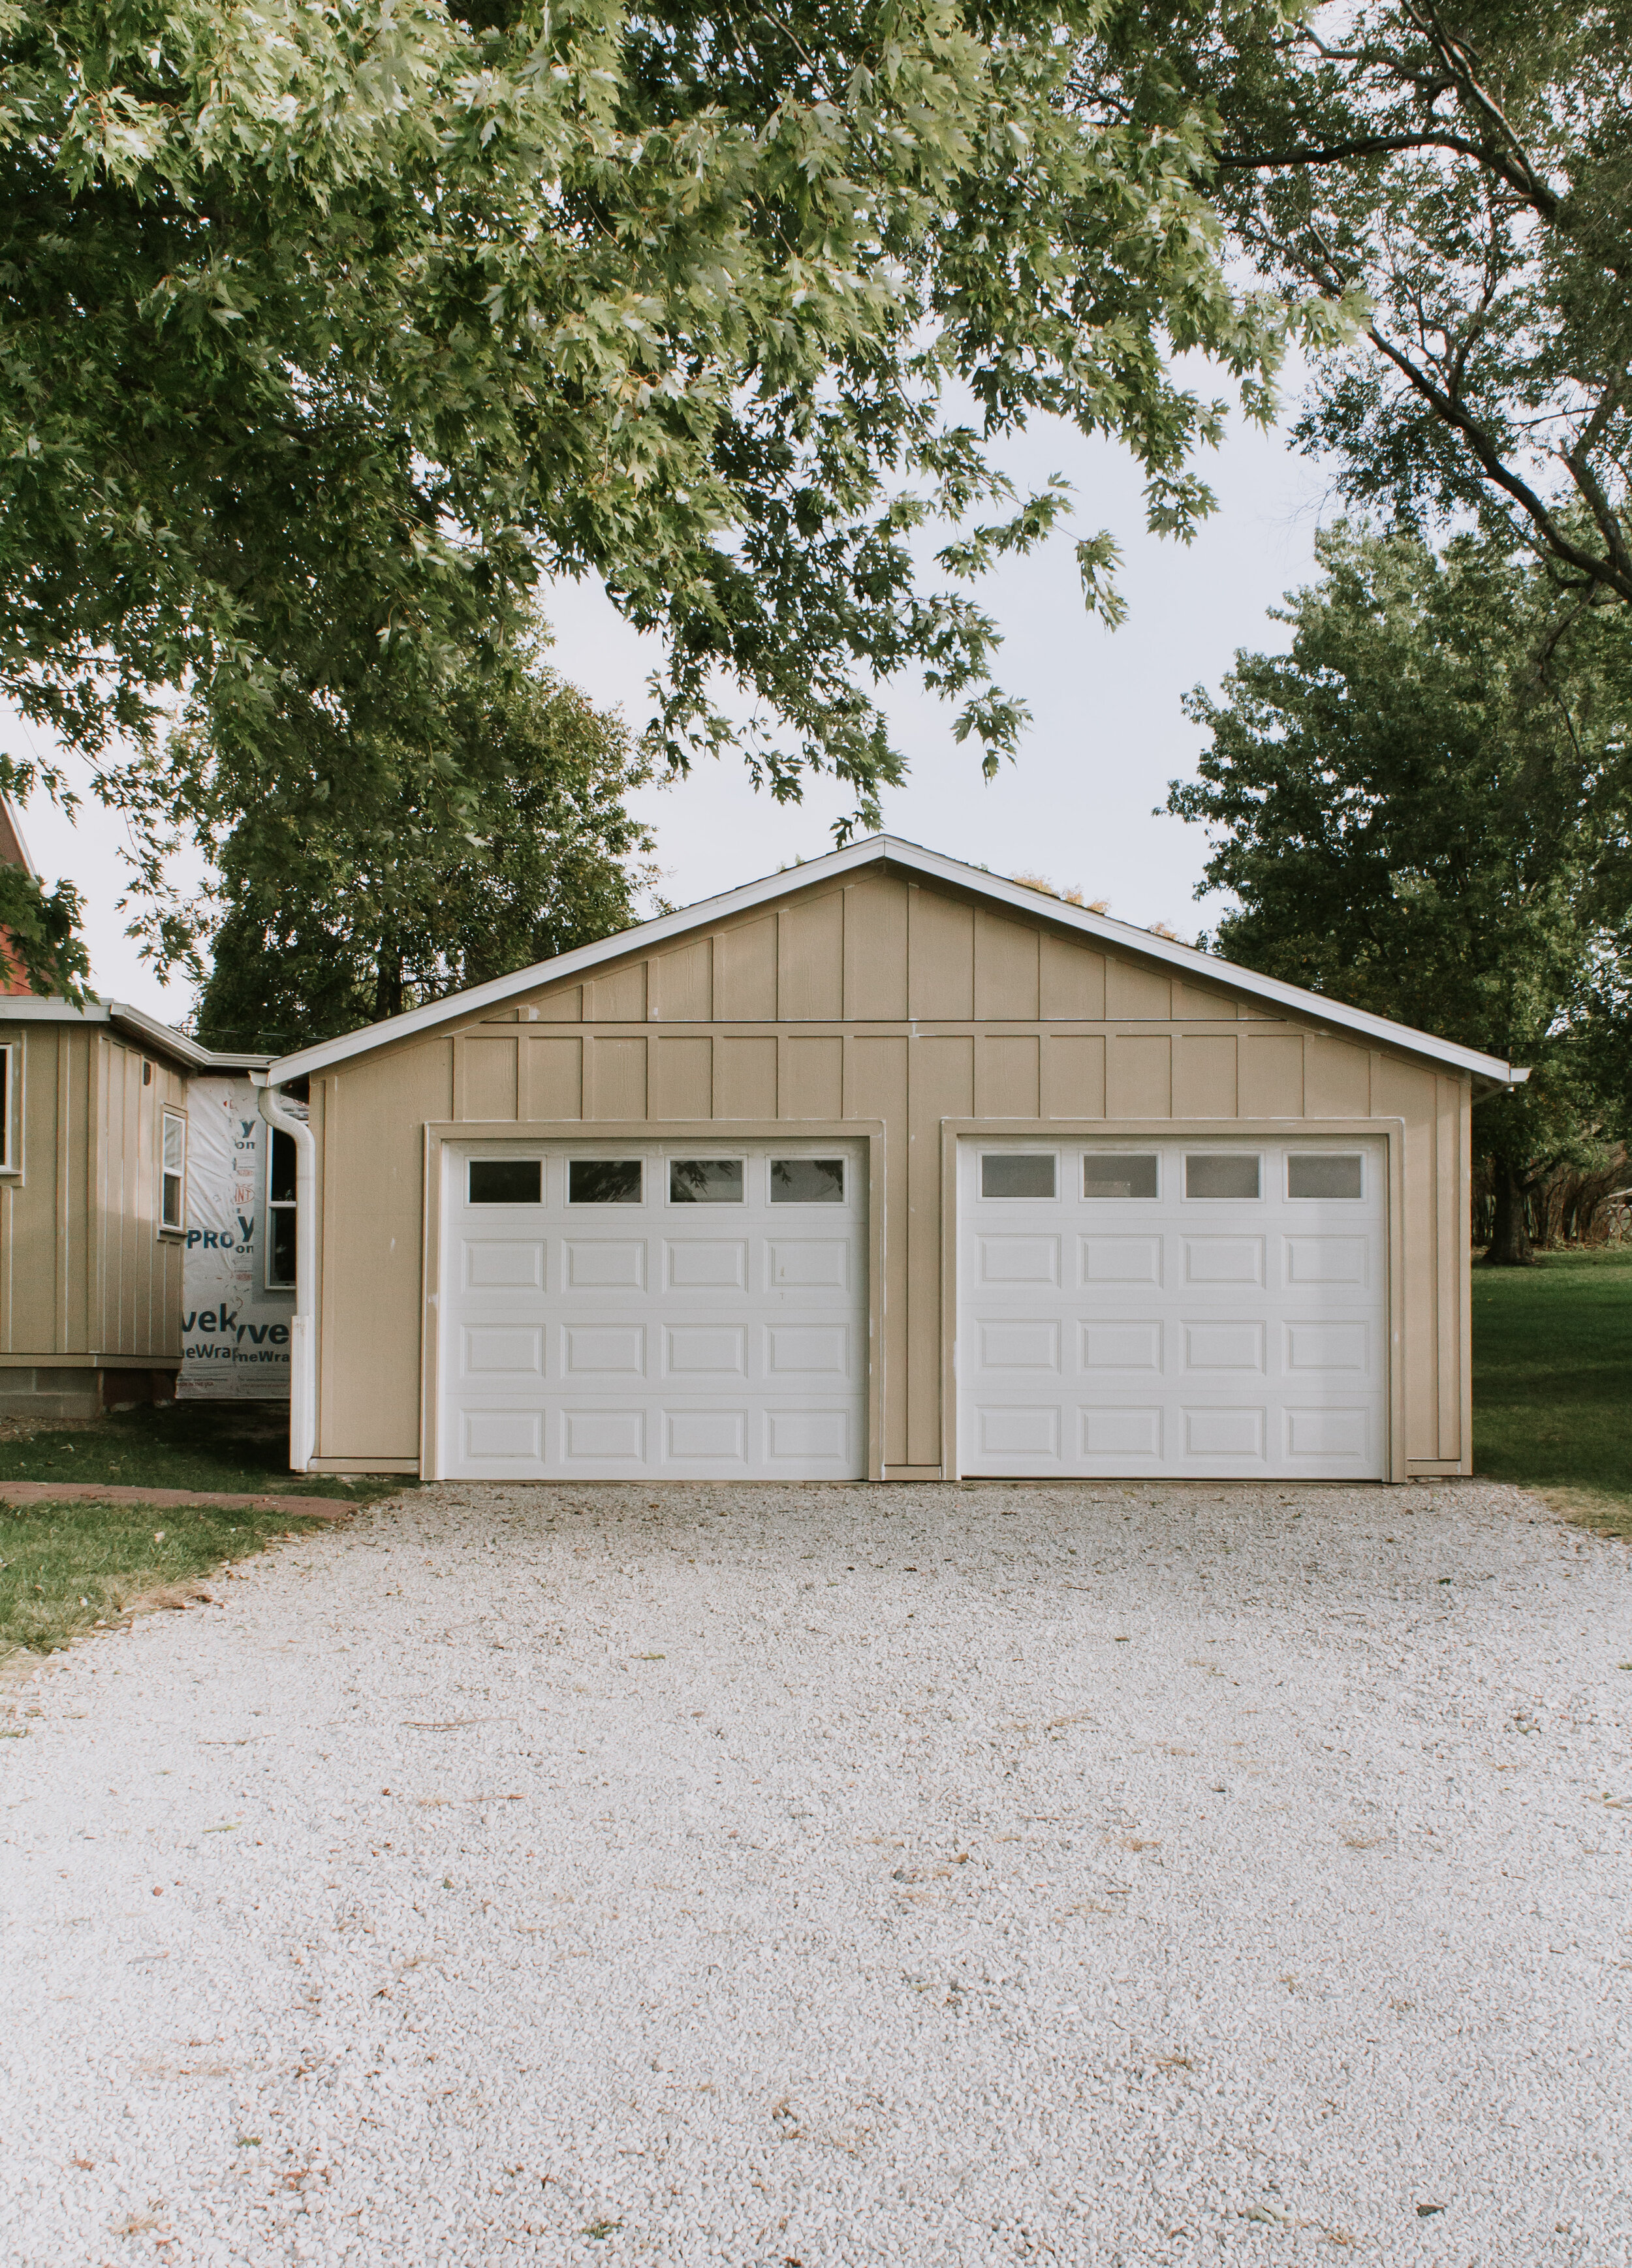 All the details on our board and batten siding. The style we chose, the material we chose, and where we bought it. Our honest opinion of LP SmartSide with info and specs. | Nadine Stay